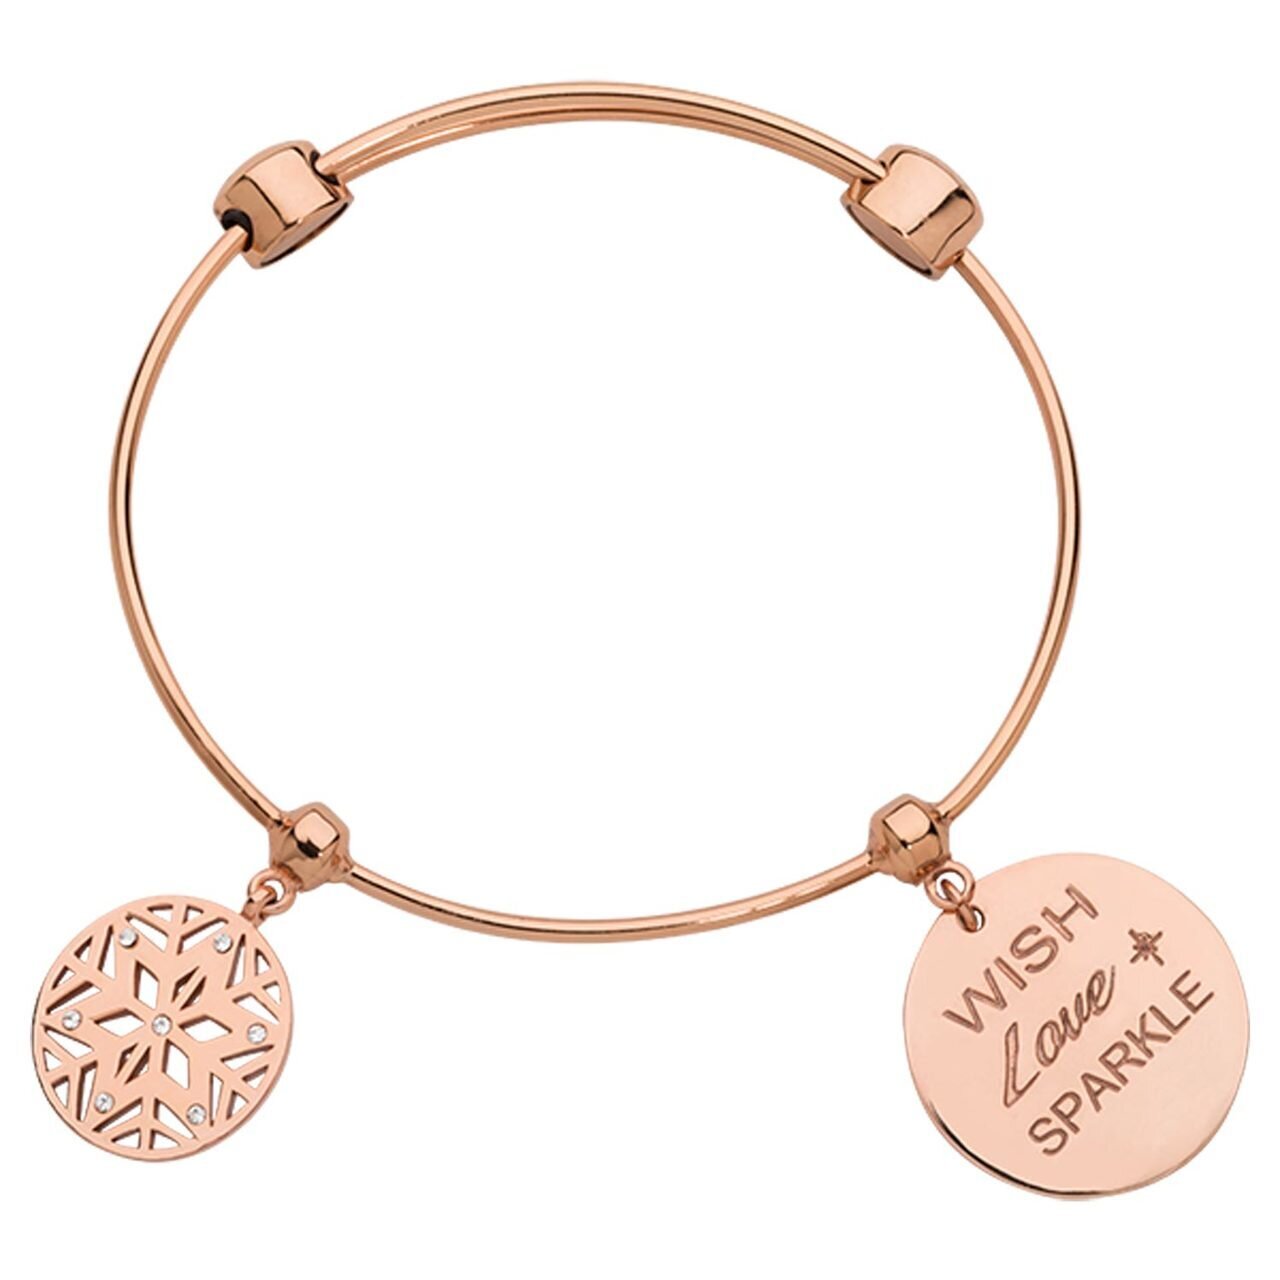 Nikki Lissoni Charm Bangle with Two Fixed Charms Snowflake Wish Love Sparkle Rose Gold-plated 21cm B1163RG21